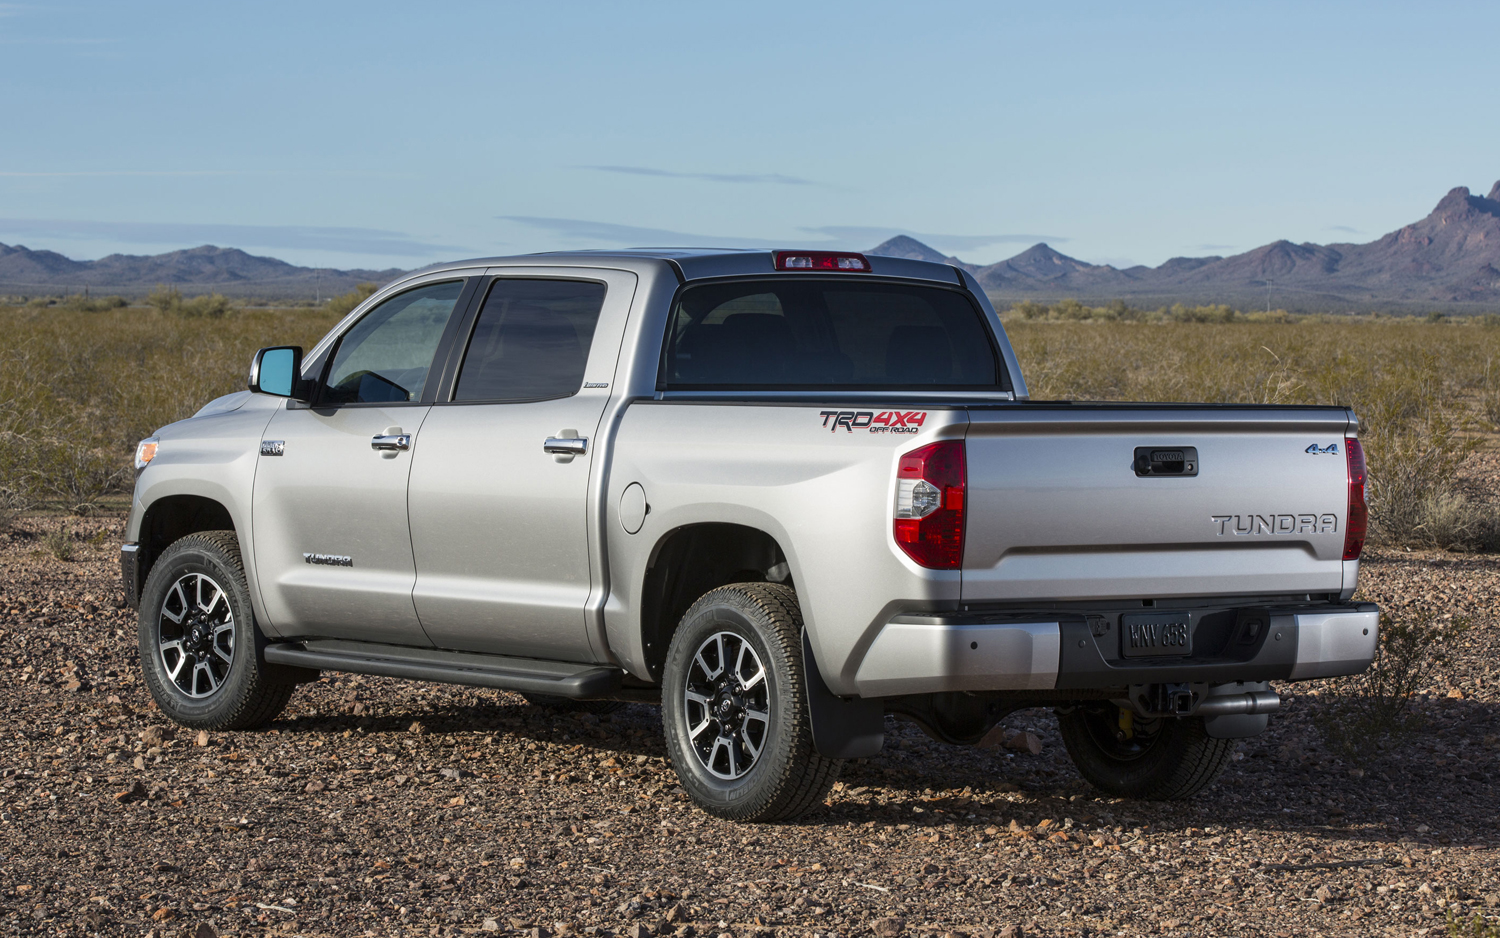 Review: The new 2014 Toyota Tundra is well aimed at Toyota loyalists